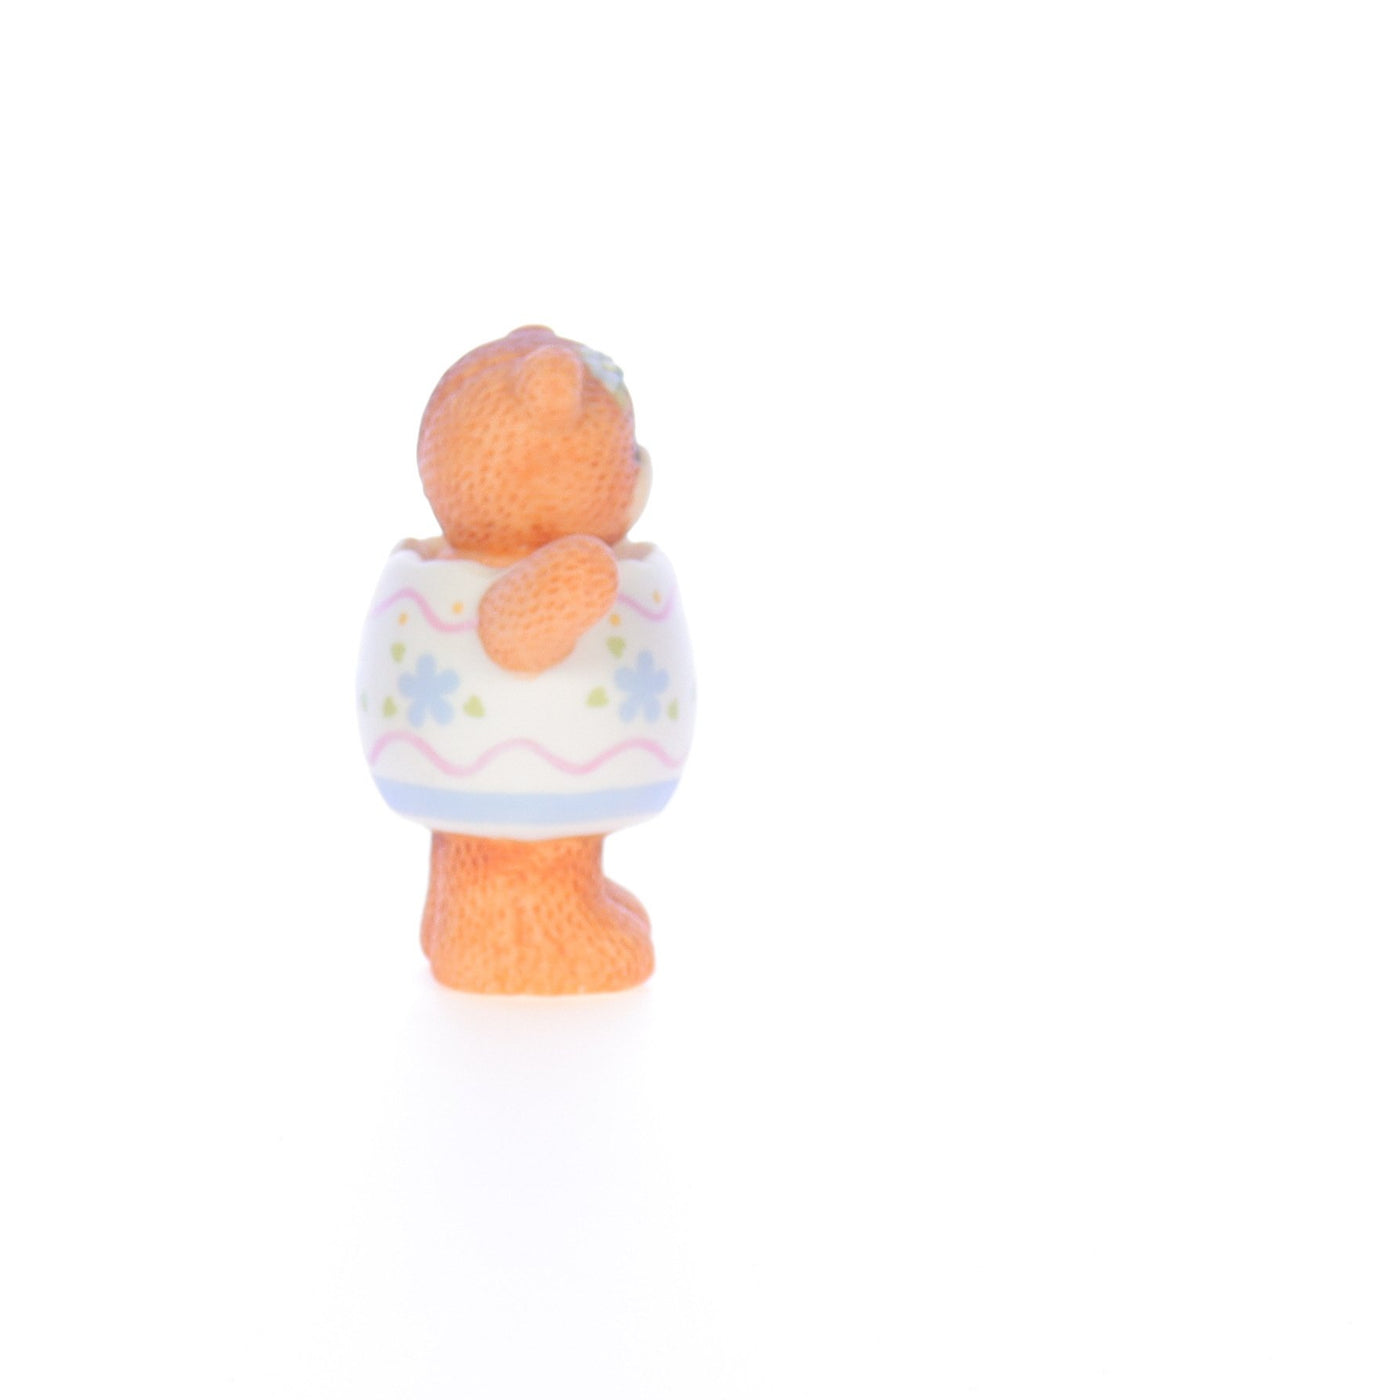 Lucy_And_Me_by_Lucy_Atwell_Porcelain_Figurine_Girl_Bear_with_Easter_Egg_Costume_Lucy_Unknown_062_07